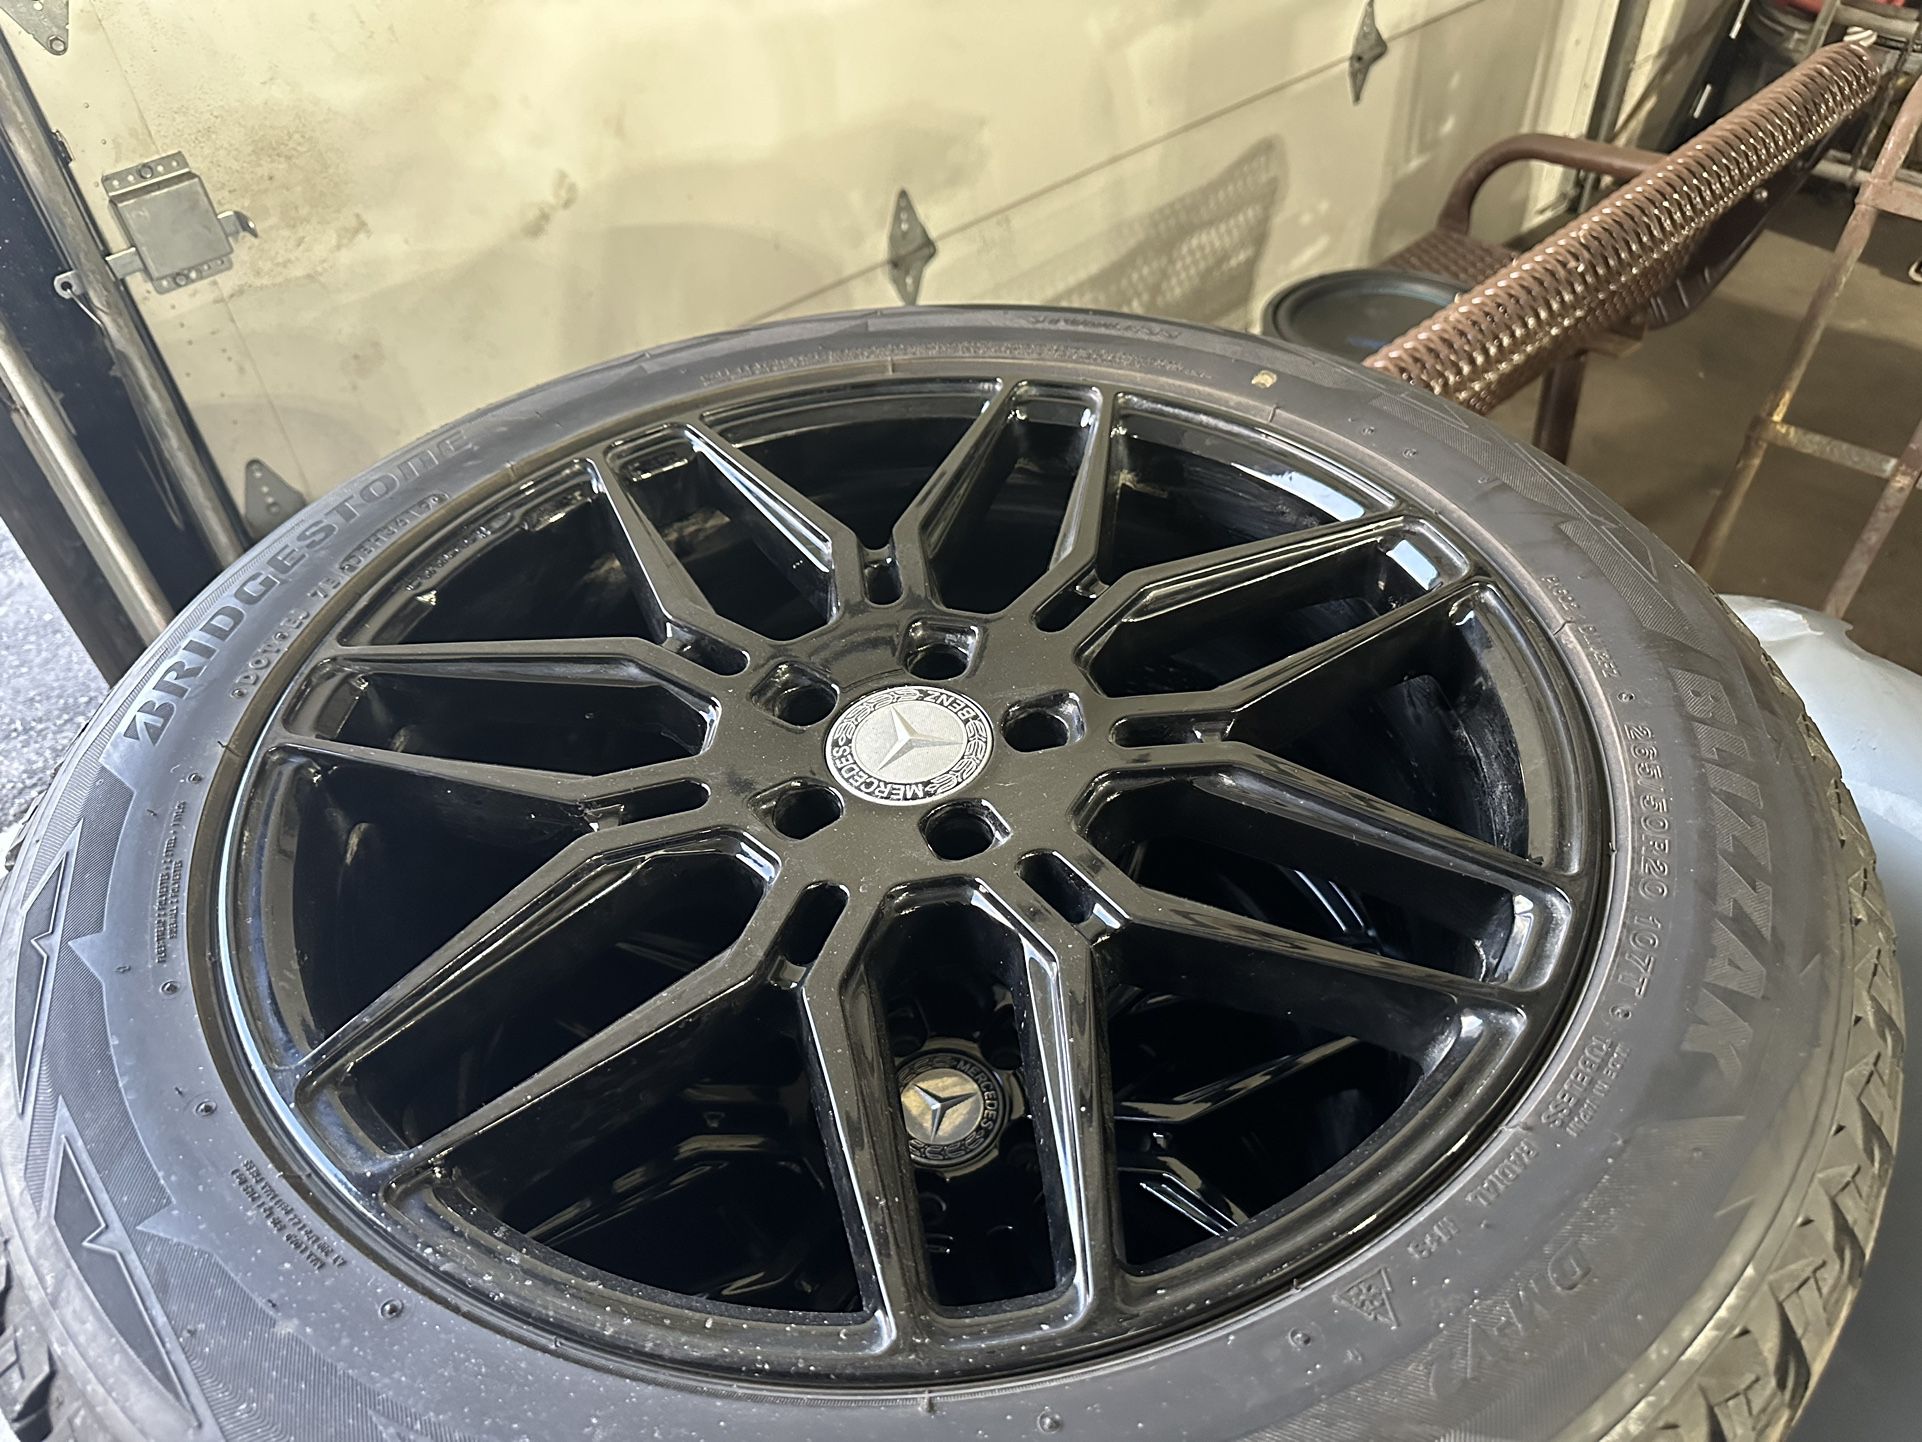 20’’ Gianelle Rims With Tires 